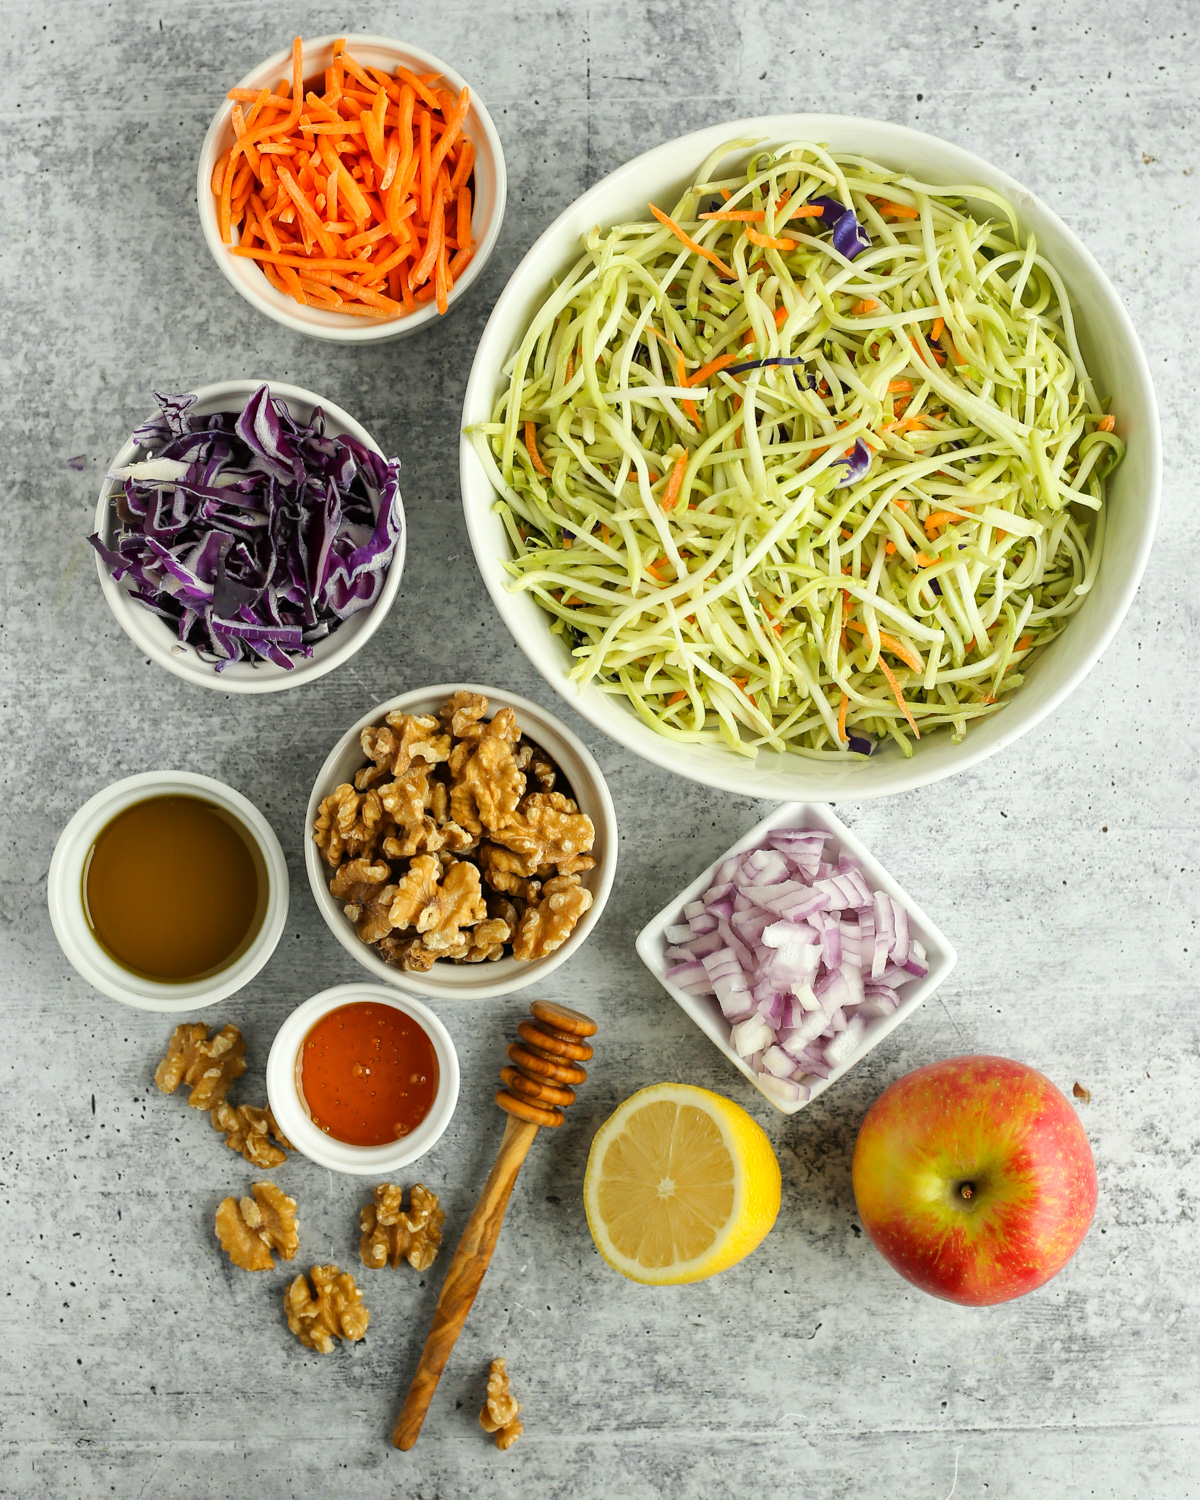 Flatlay on a kitchen countertop with the ingredients needed for this broccoli salad, including broccoli slaw, matchstick carrots, shredded red cabbage, diced red onions, walnuts, and the components of a dairy-free dressing